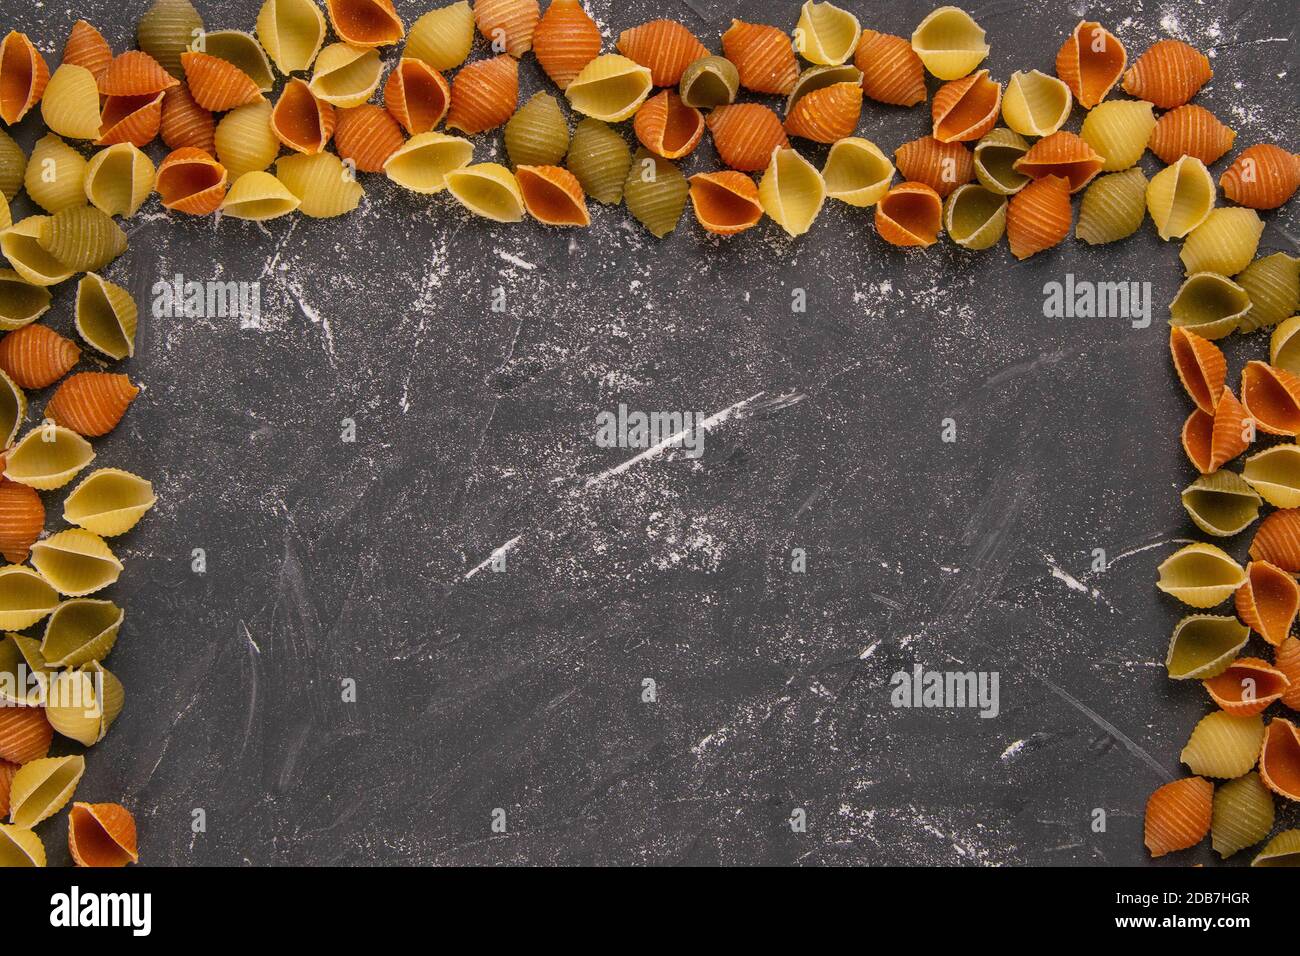 Pasta Conchiglie Rigate, mix of colorful uncooked shells in the shape of a rectangle with an empty middle. Textured Italian food background concept. T Stock Photo